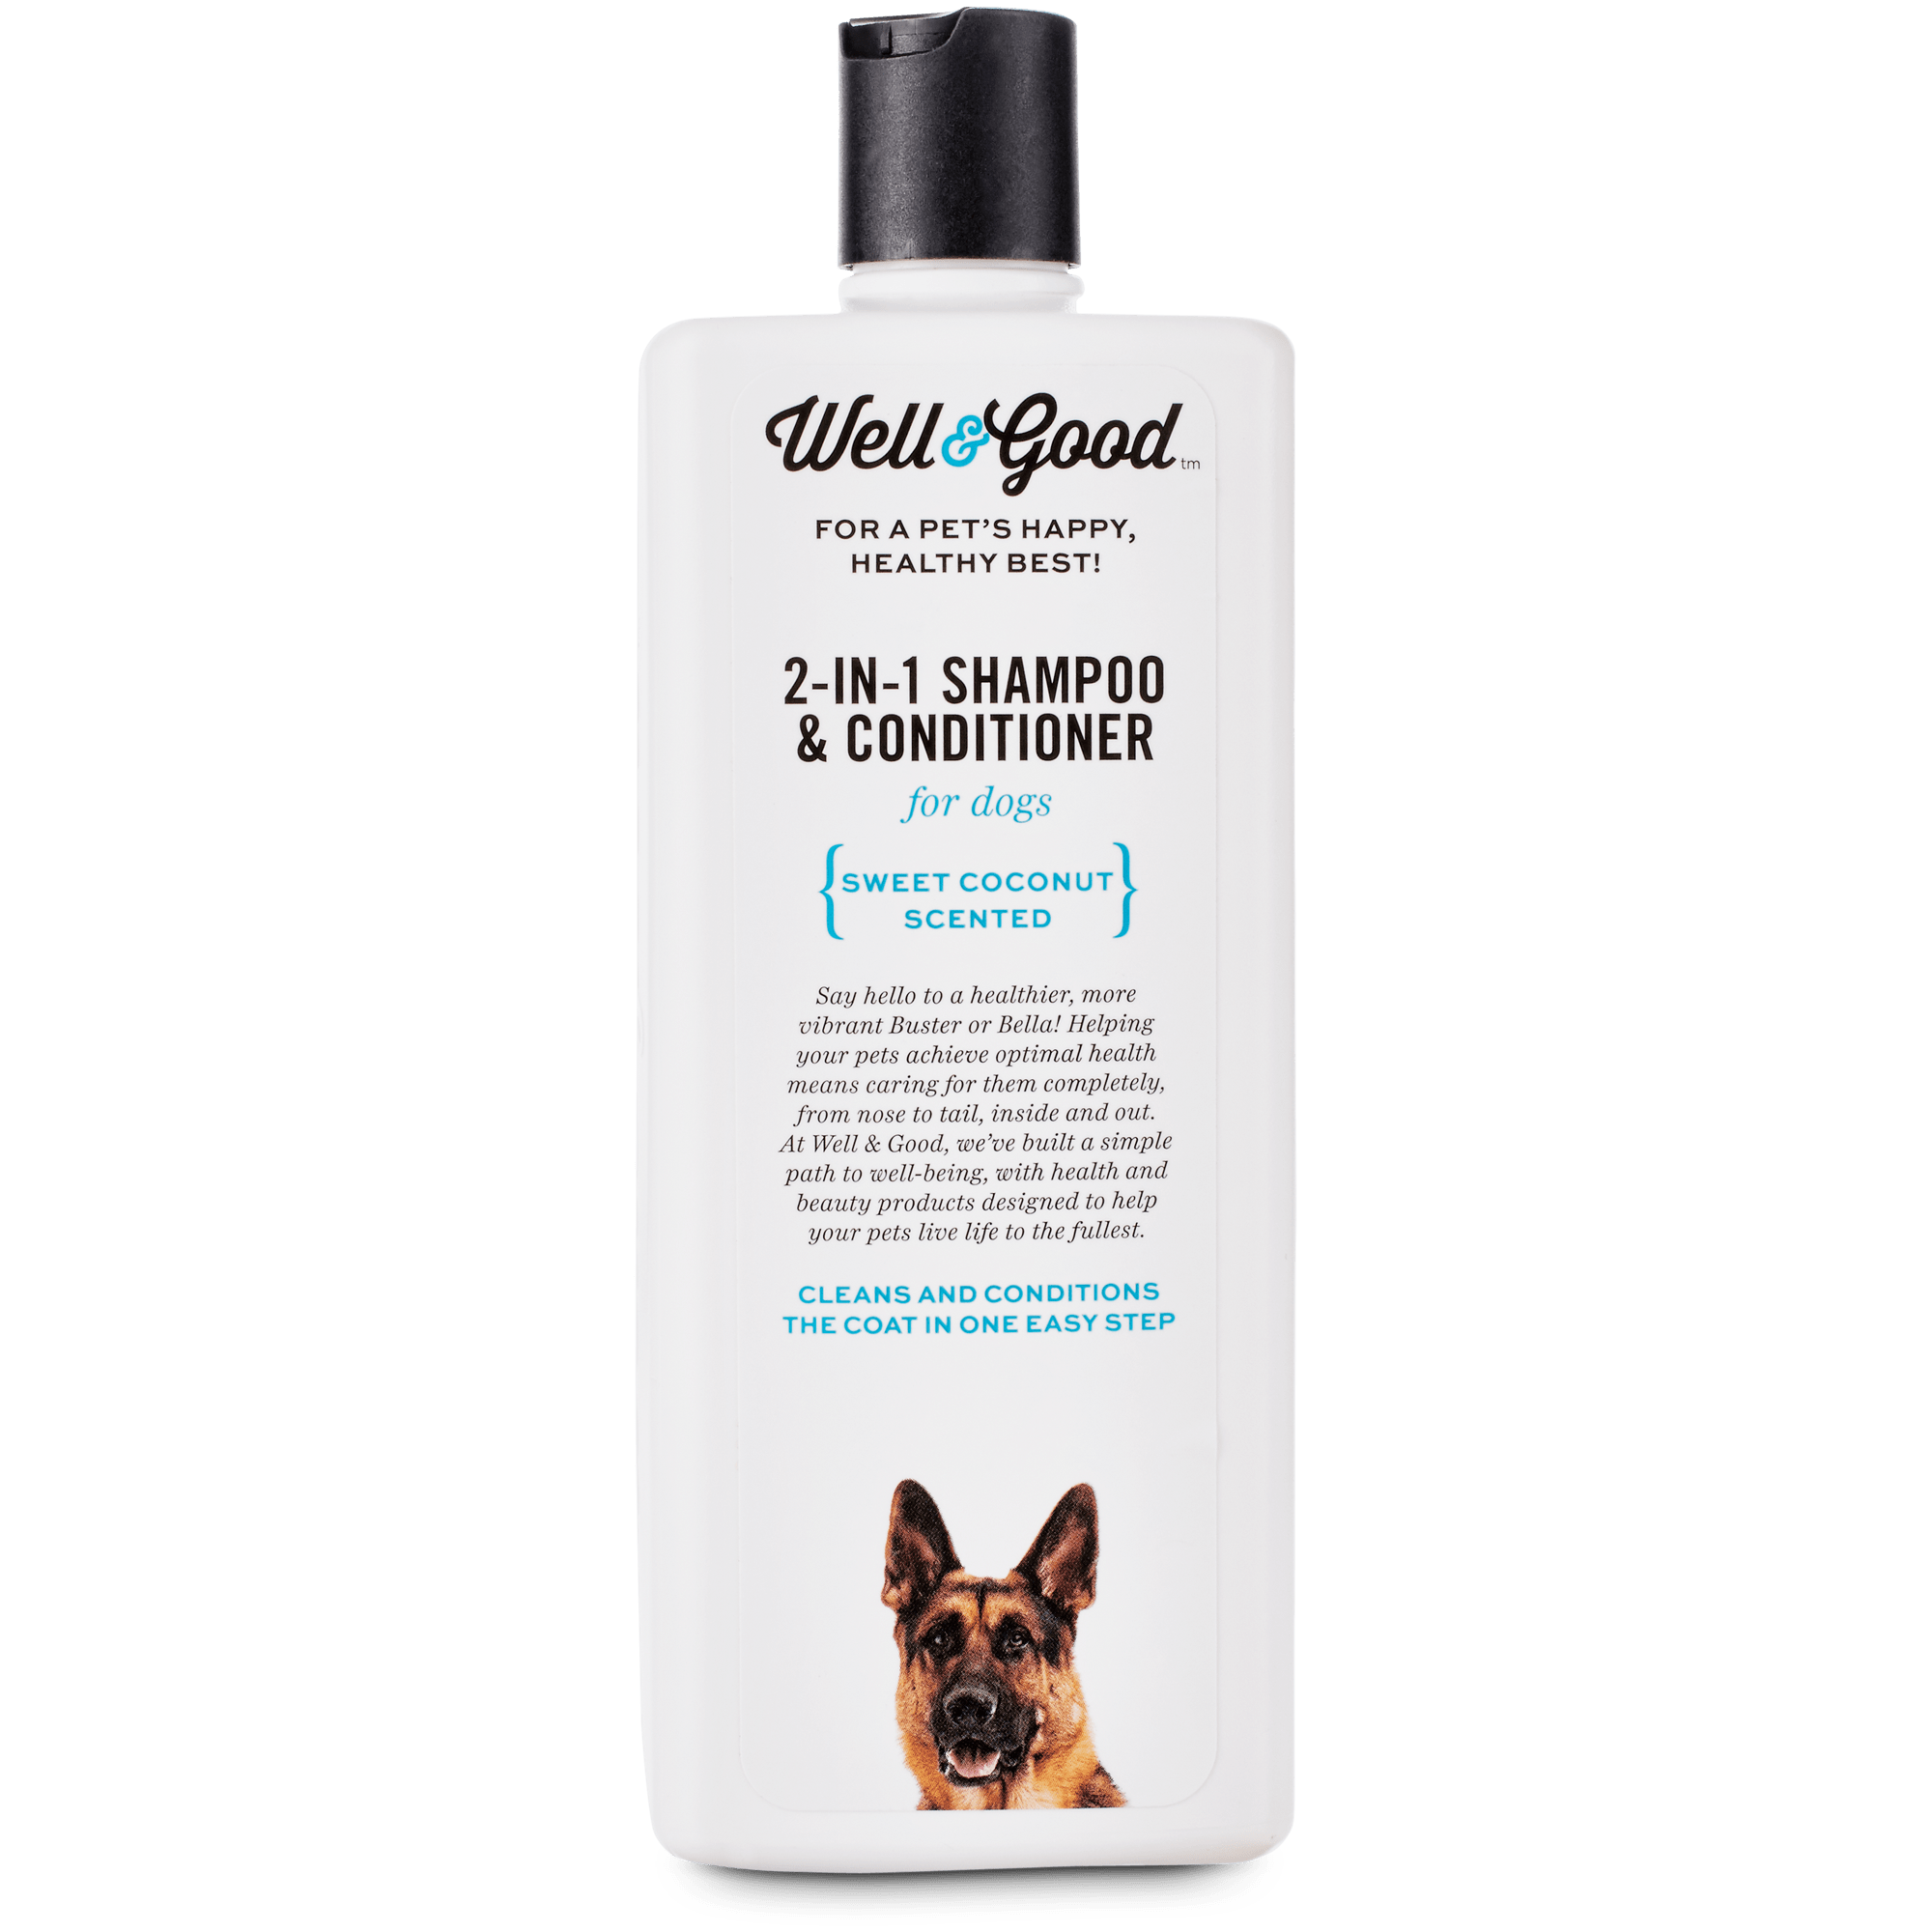 best shampoo for show dogs